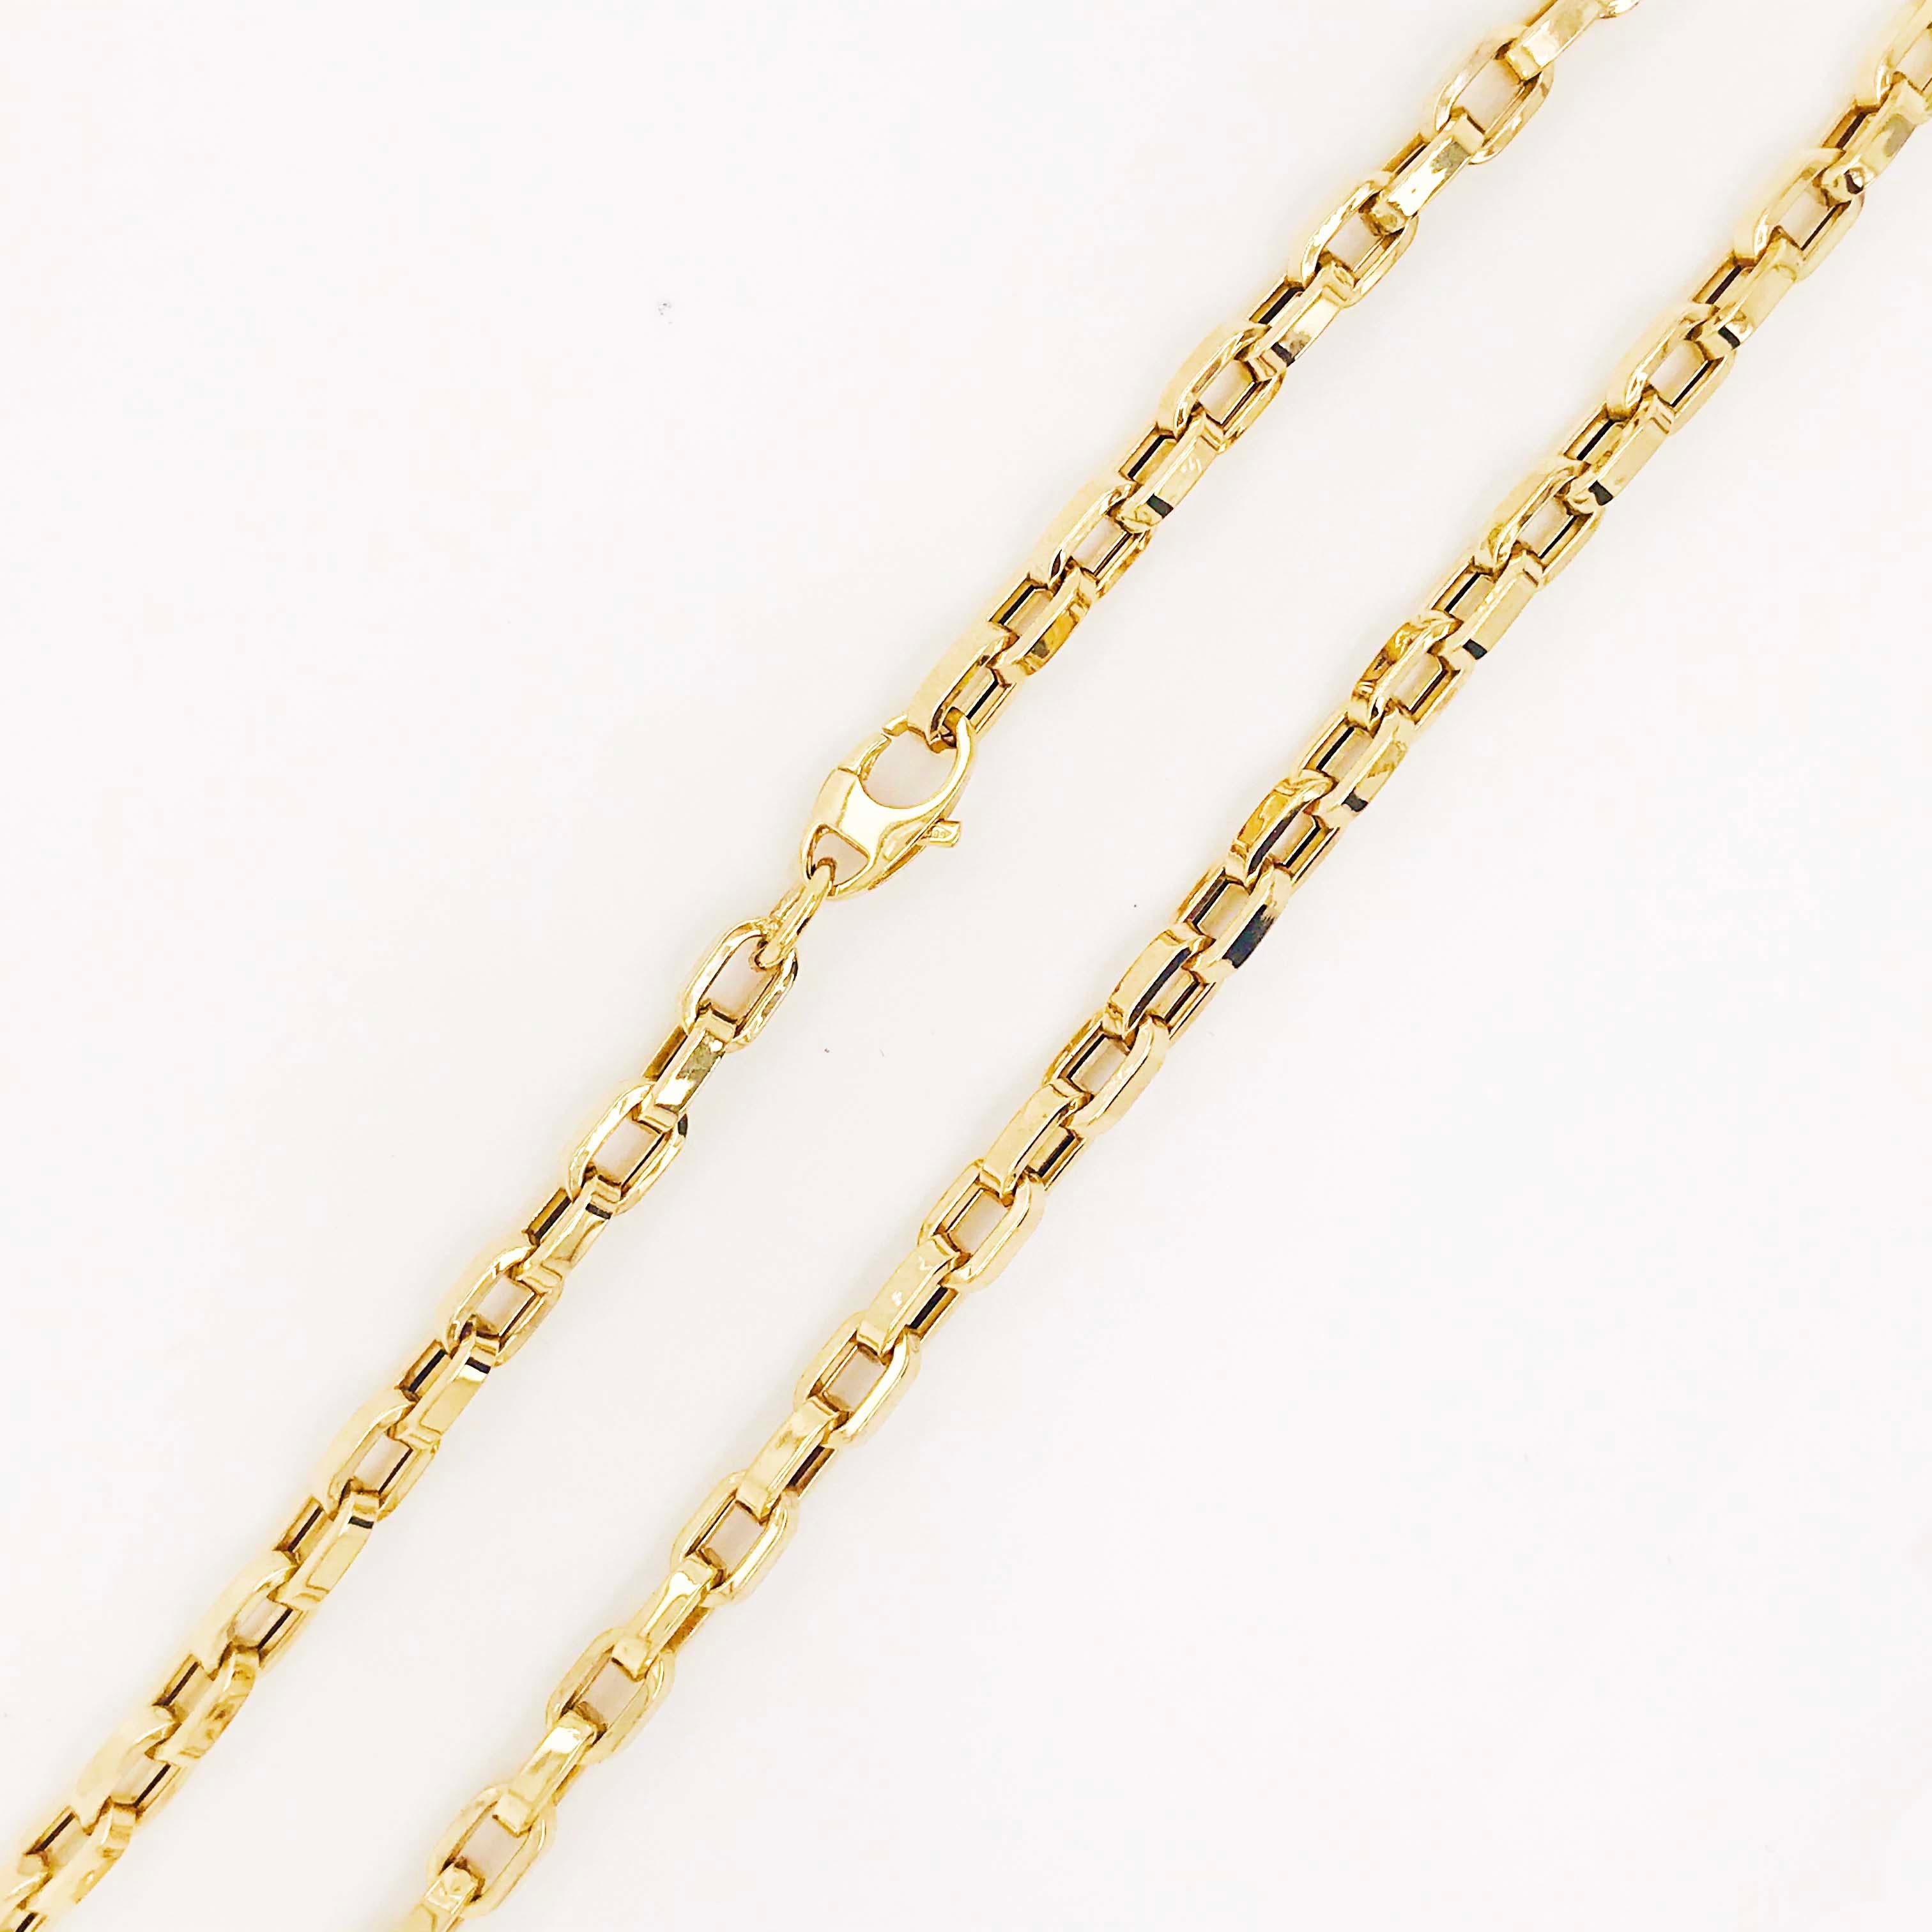 Women's or Men's Large 14k Link Chain Necklace, PaperClip Chain Cable w Large Clasp in 14kt Gold